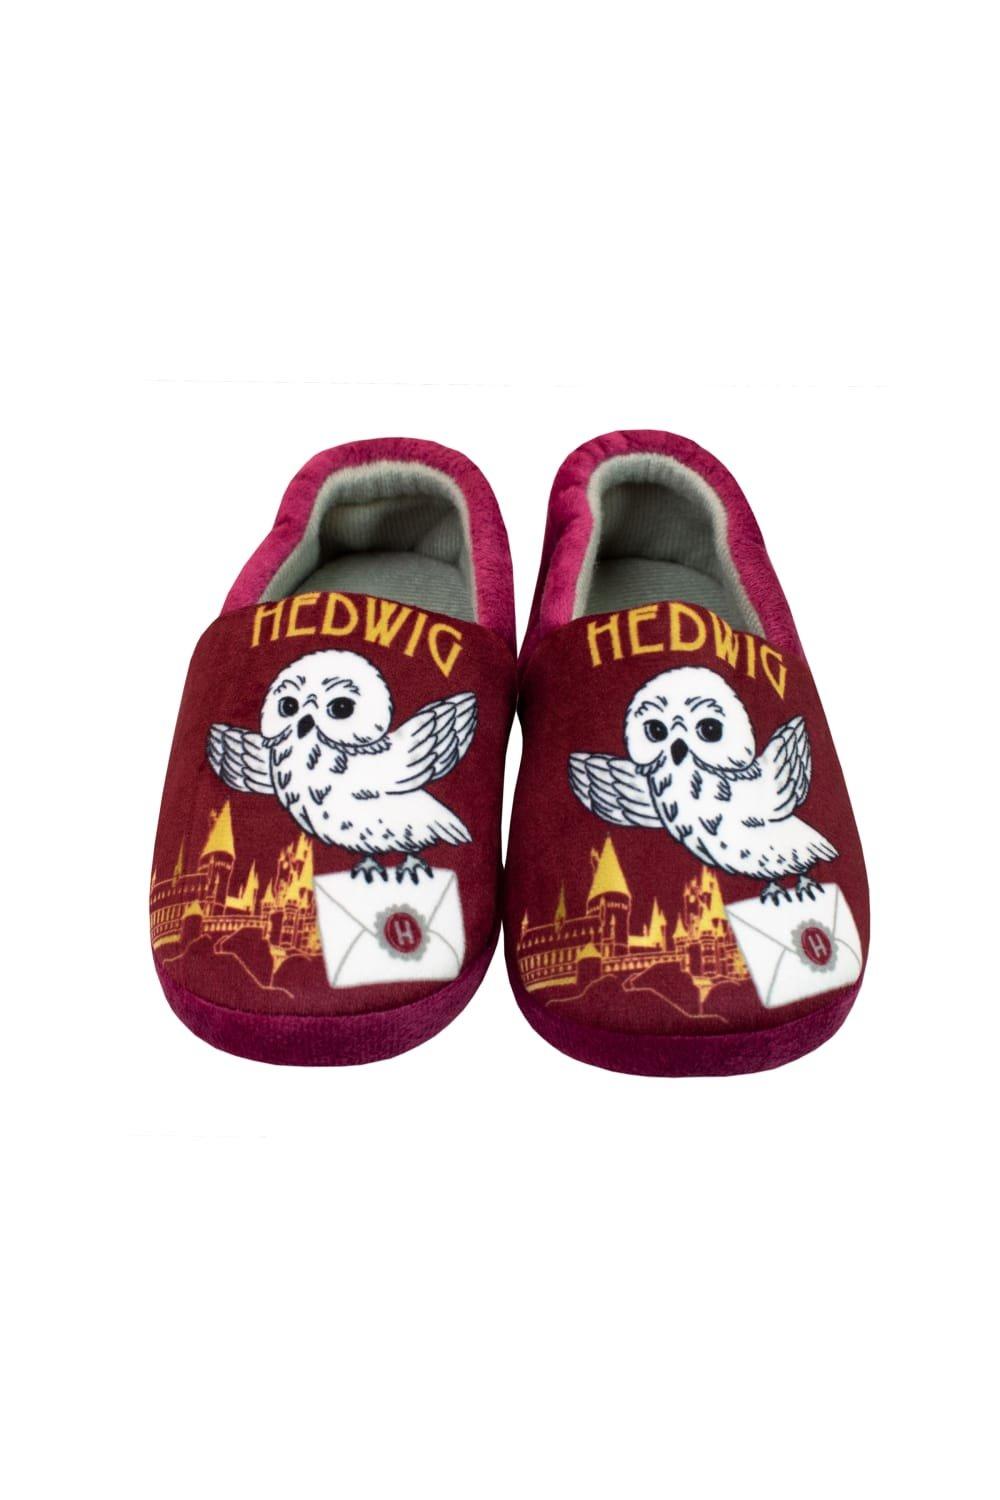 Hedwig Slippers